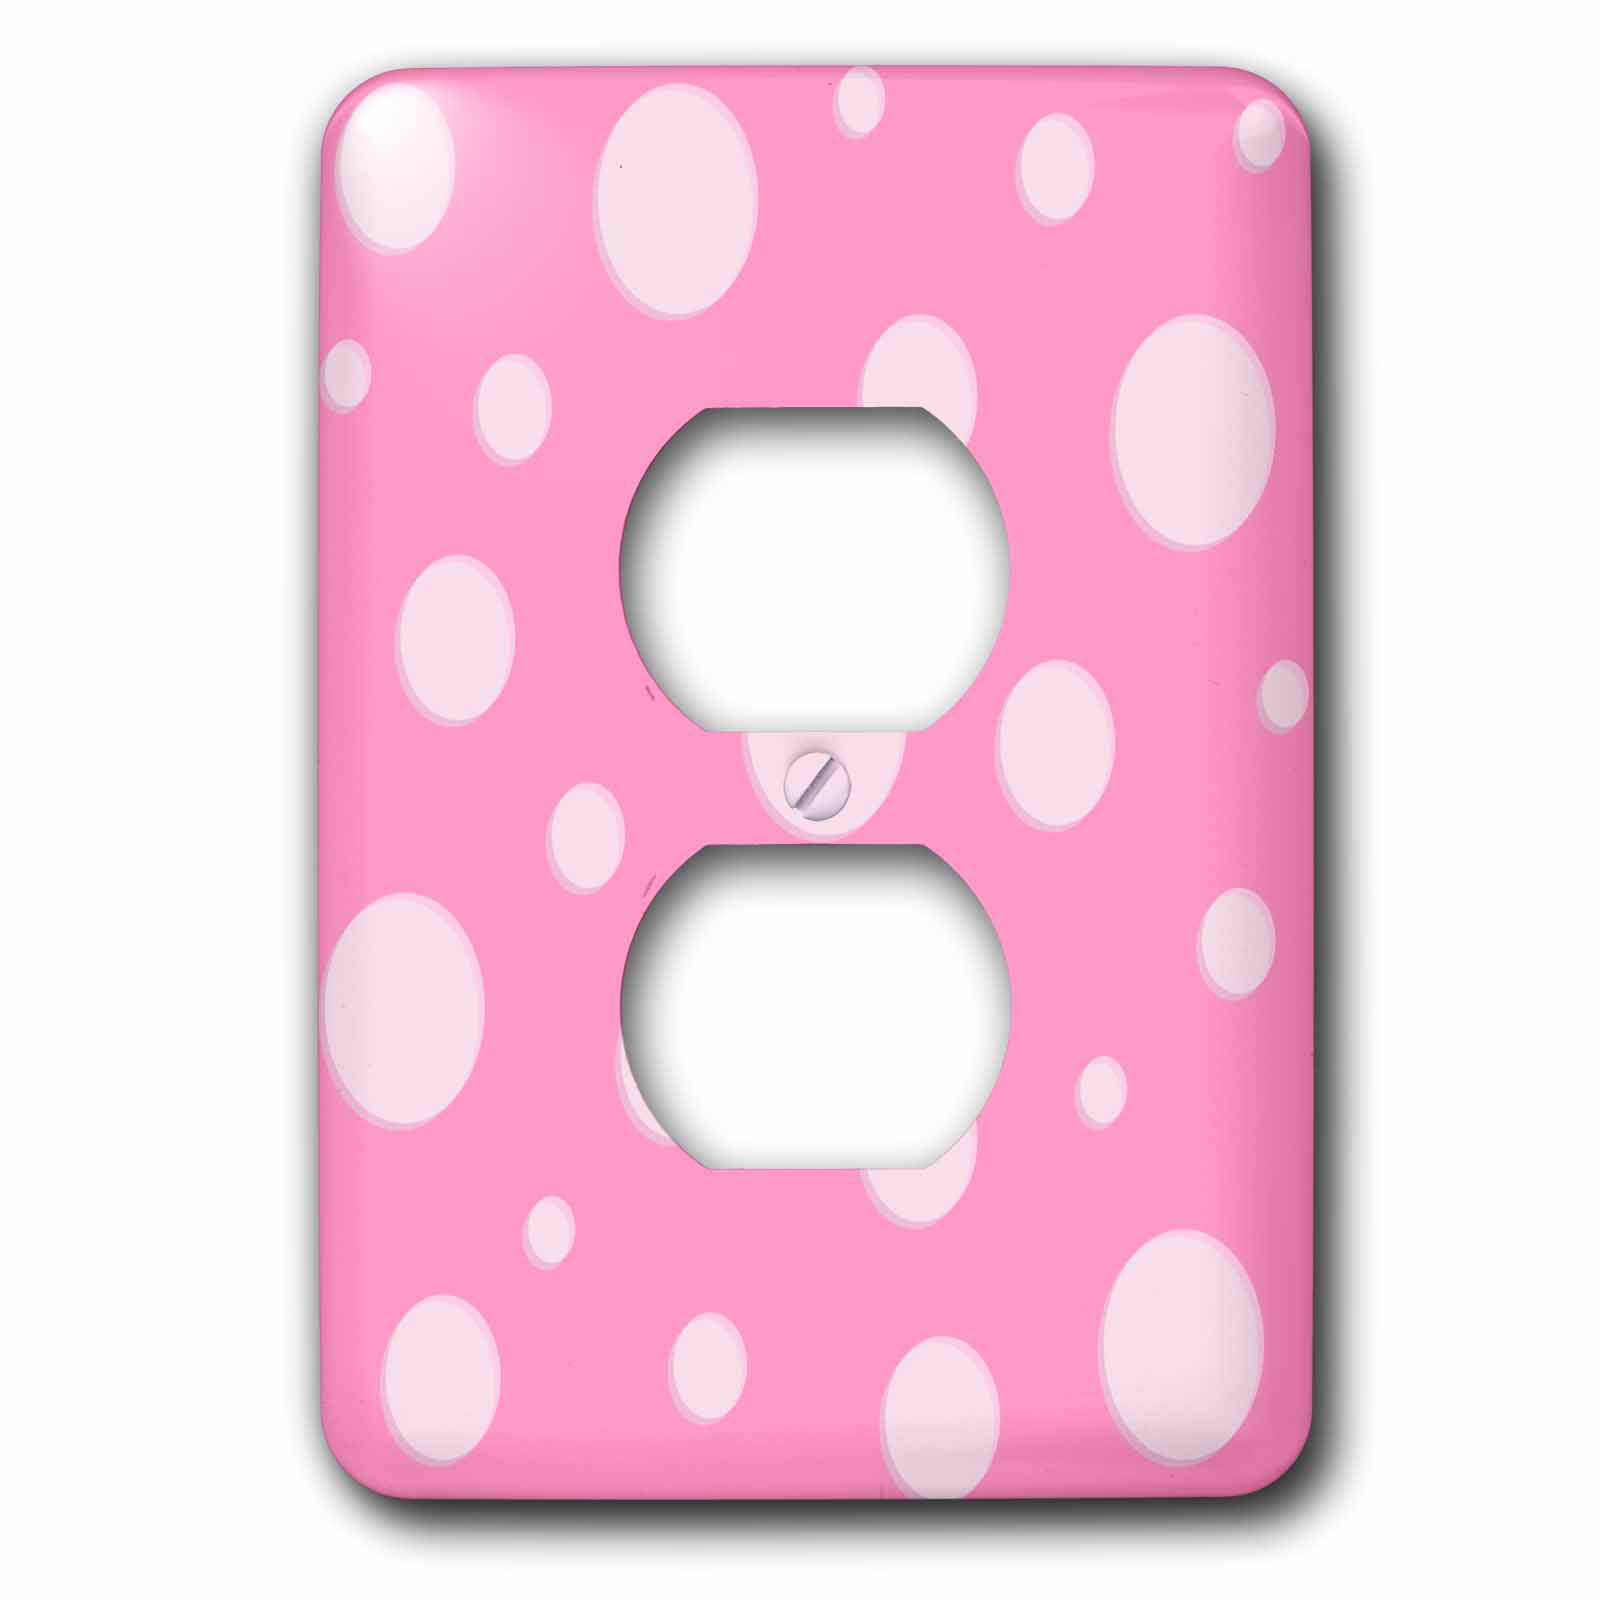 3dRose lsp_24688_6 Pale Pink and White Polka Dot Print Outlet Cover 